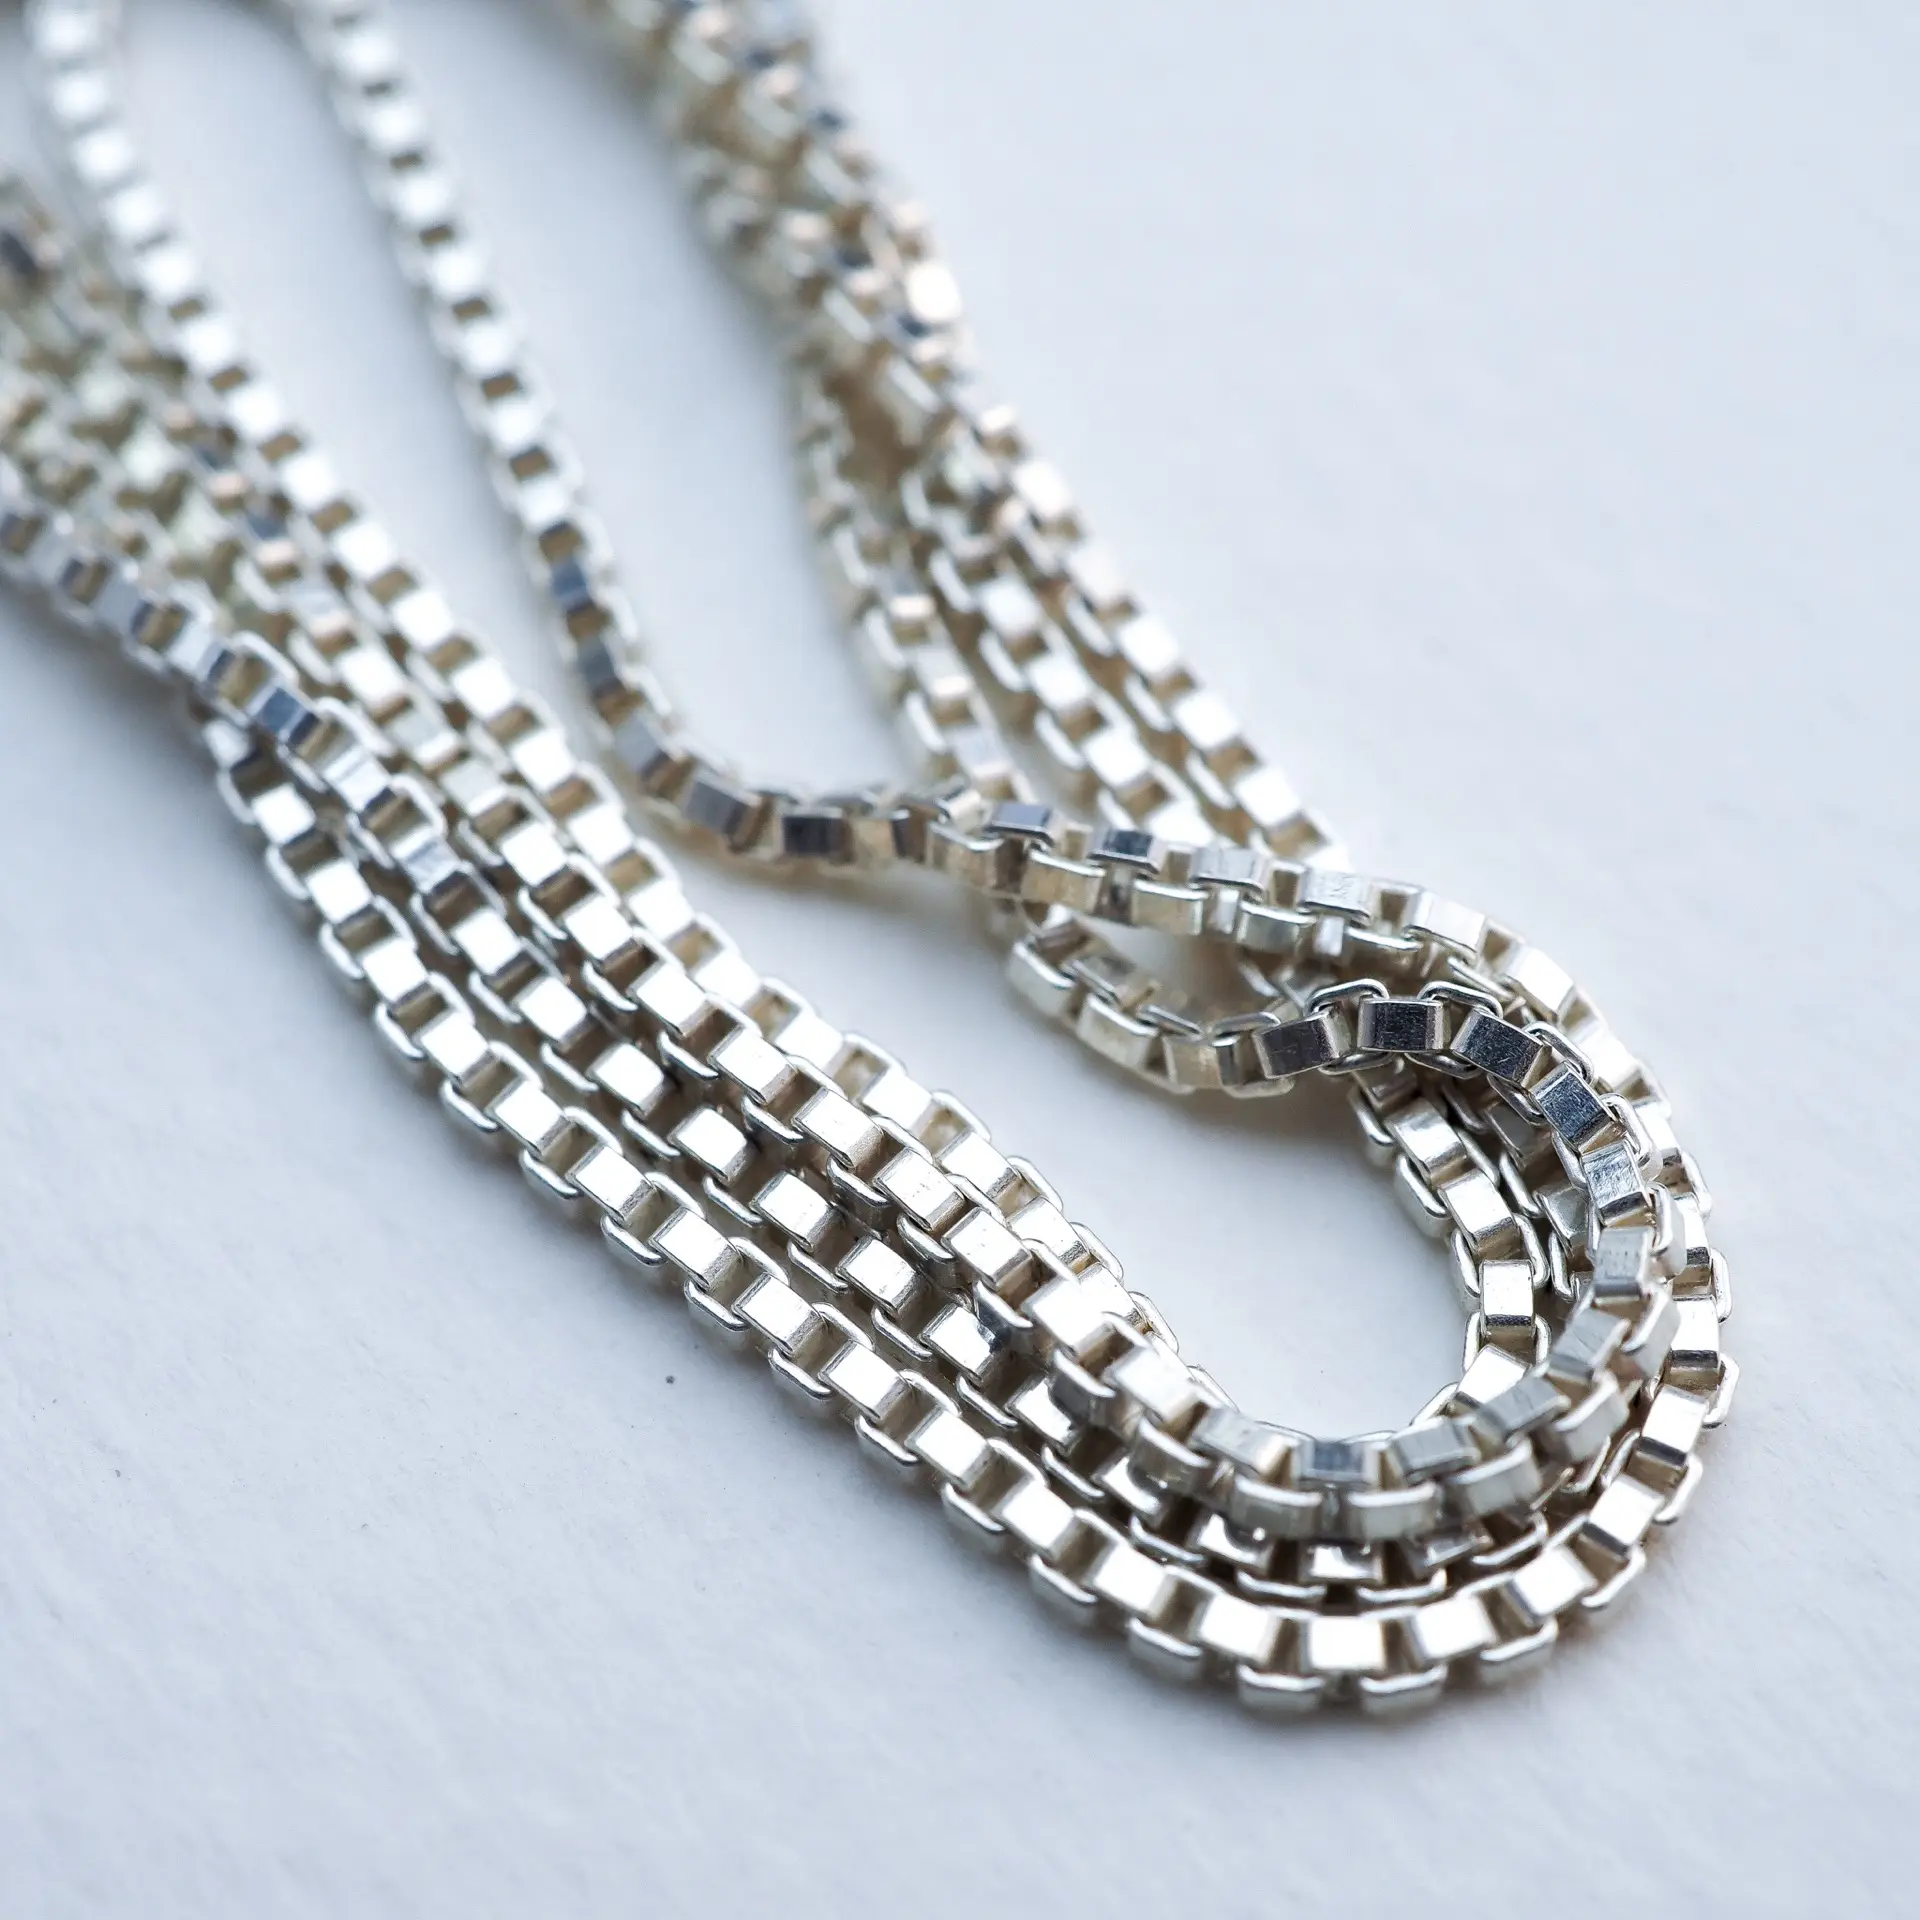 Top Seller Wholesale Silver 925 Chain Roll Classic Box Chain for Jewelry Making Necklace Bracelet from Thailand